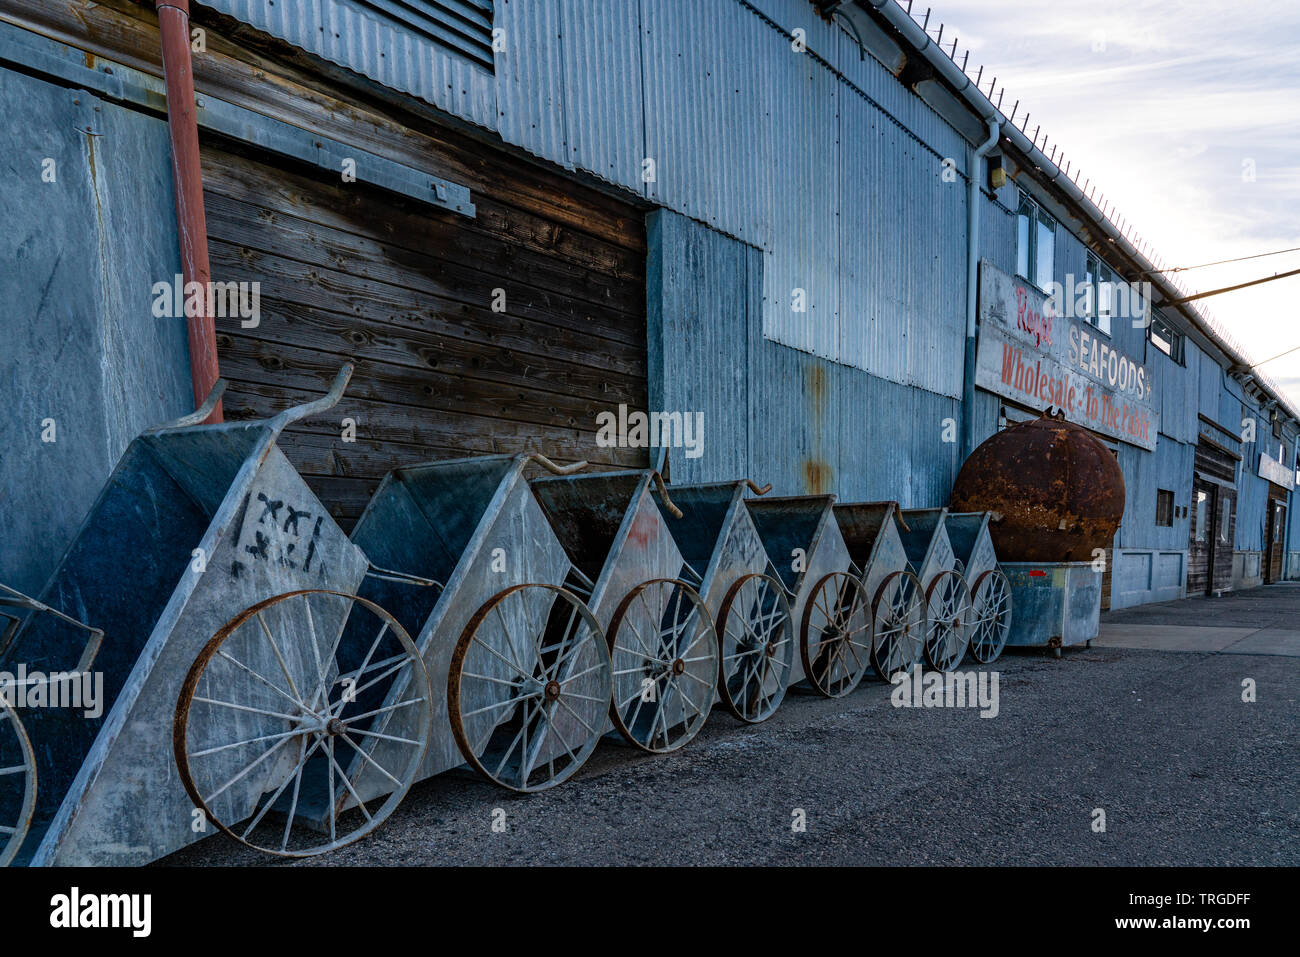 Old Wagon bins lined up along side the Monterey Fish Company building on a pier in Monterey Bay, California. Stock Photo